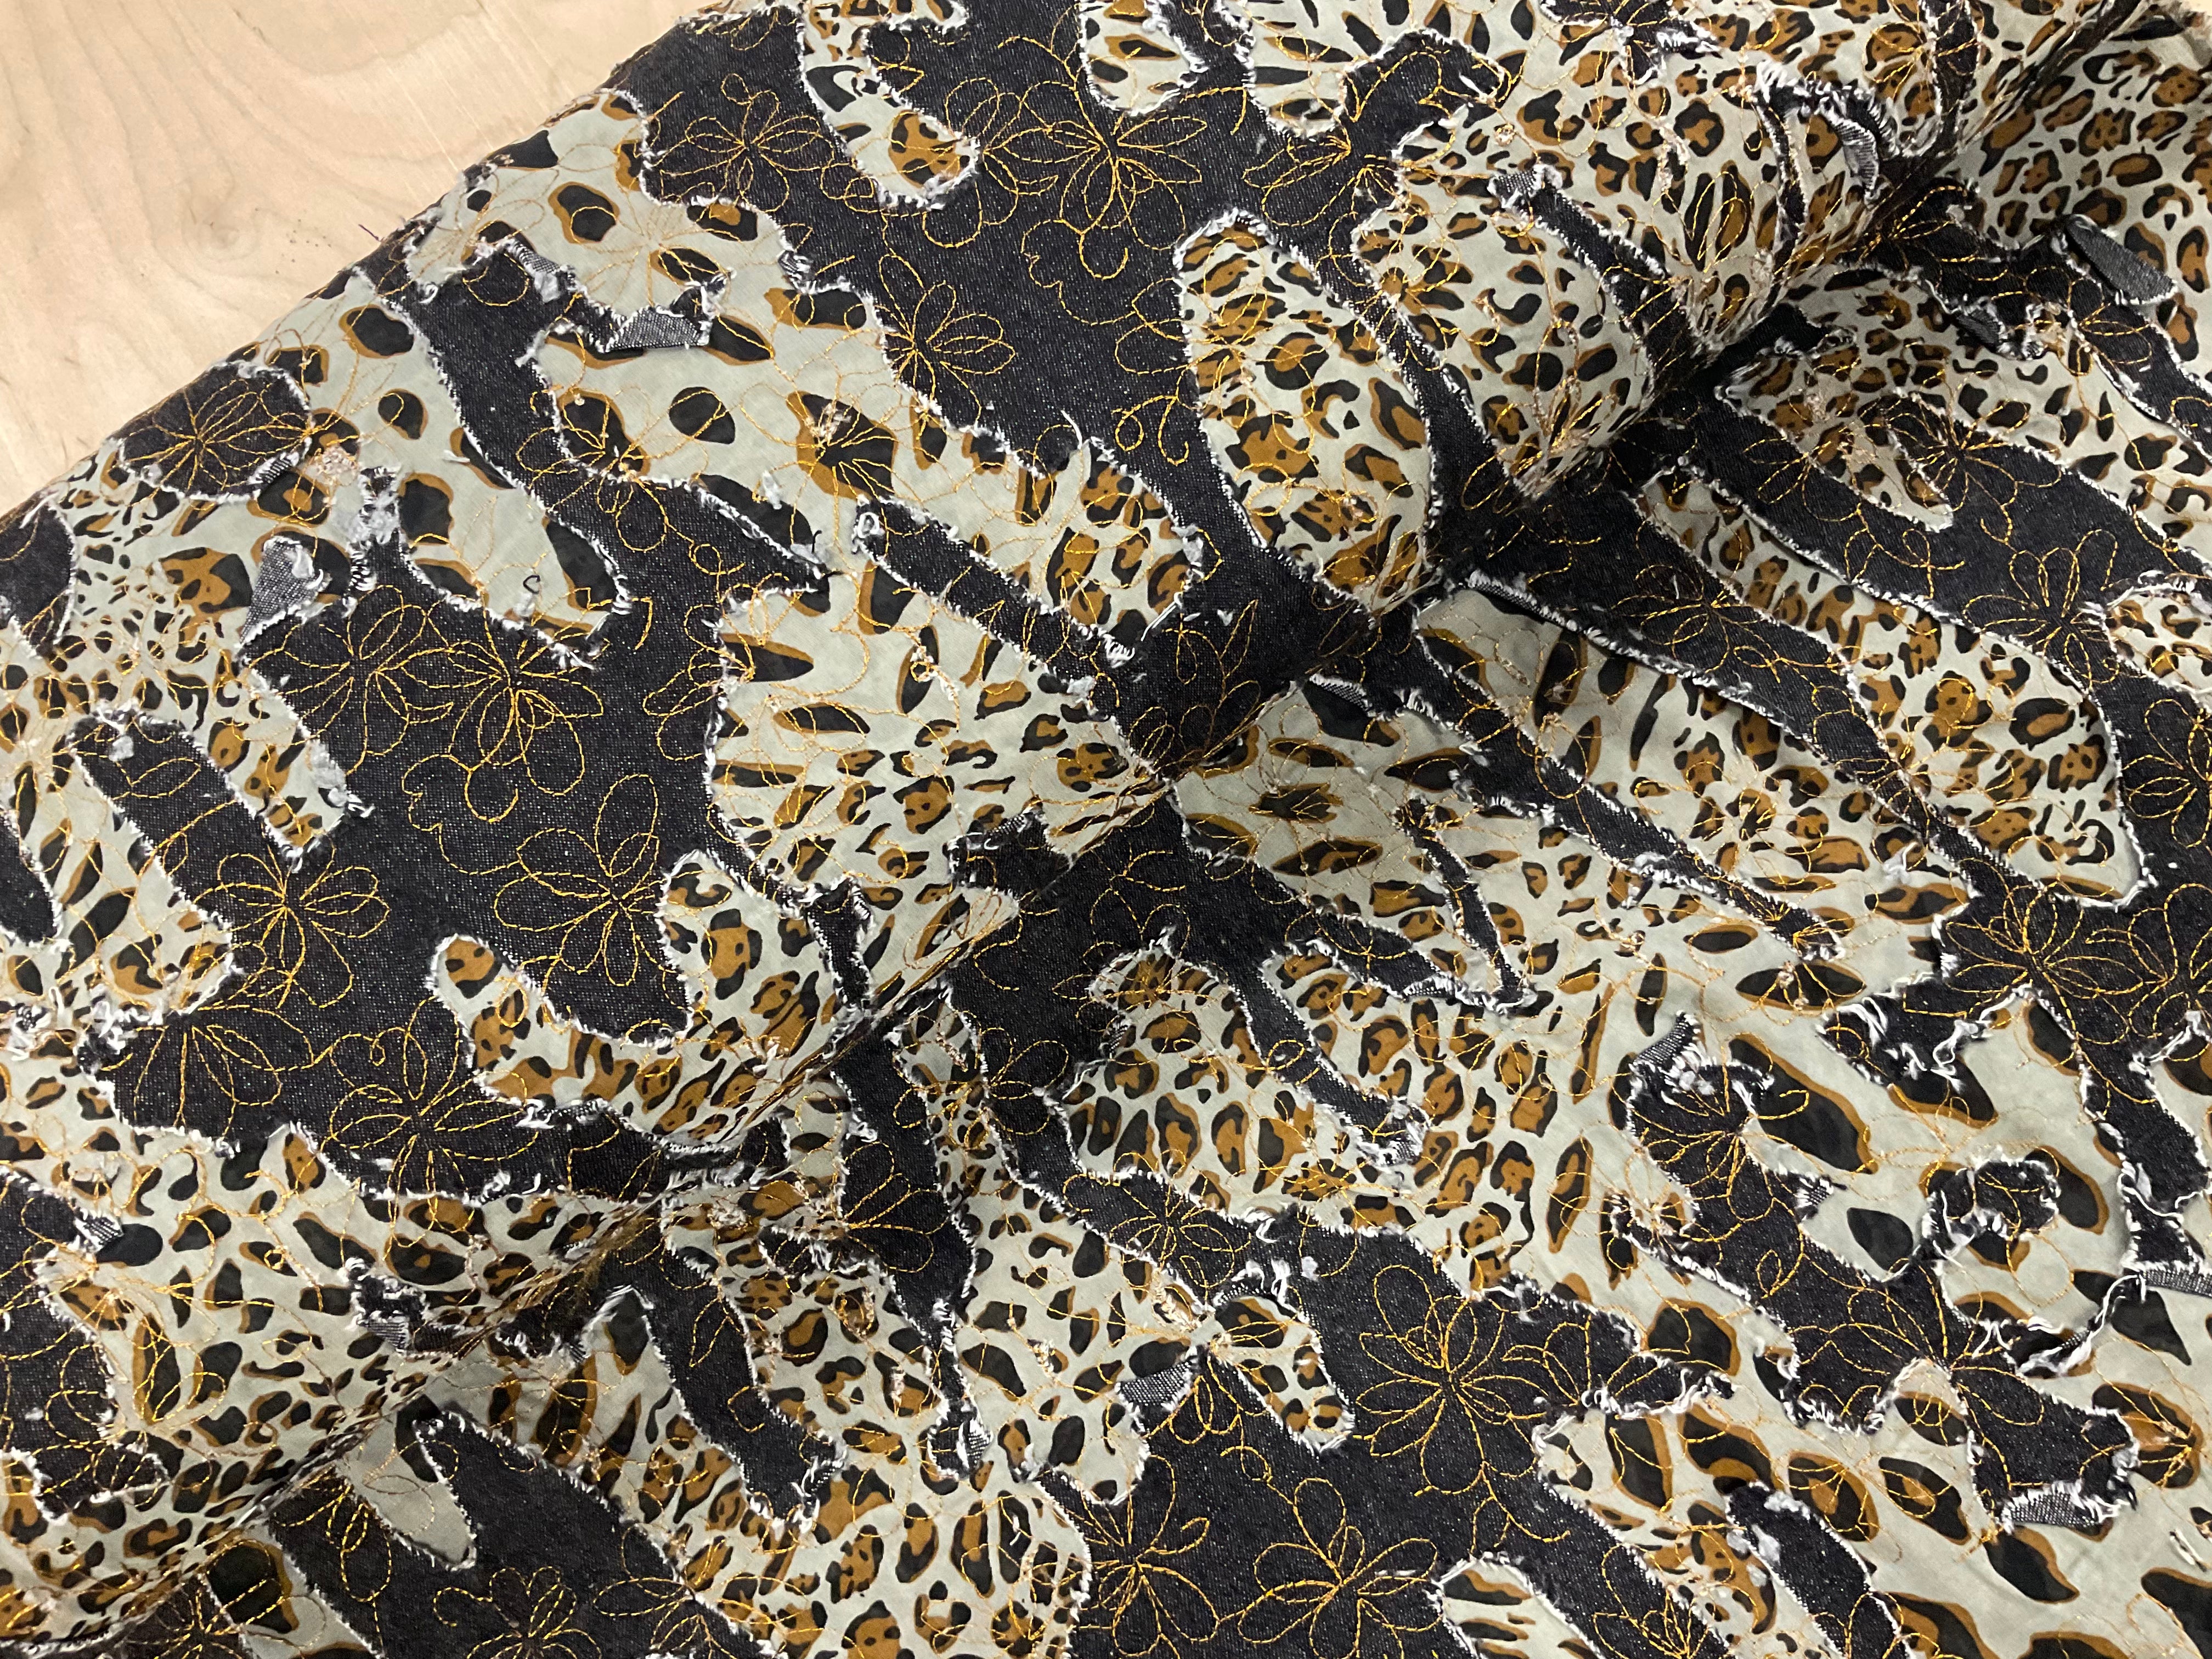 Leopard Print 100% Cotton with Appliquéd Denim and Embroidery